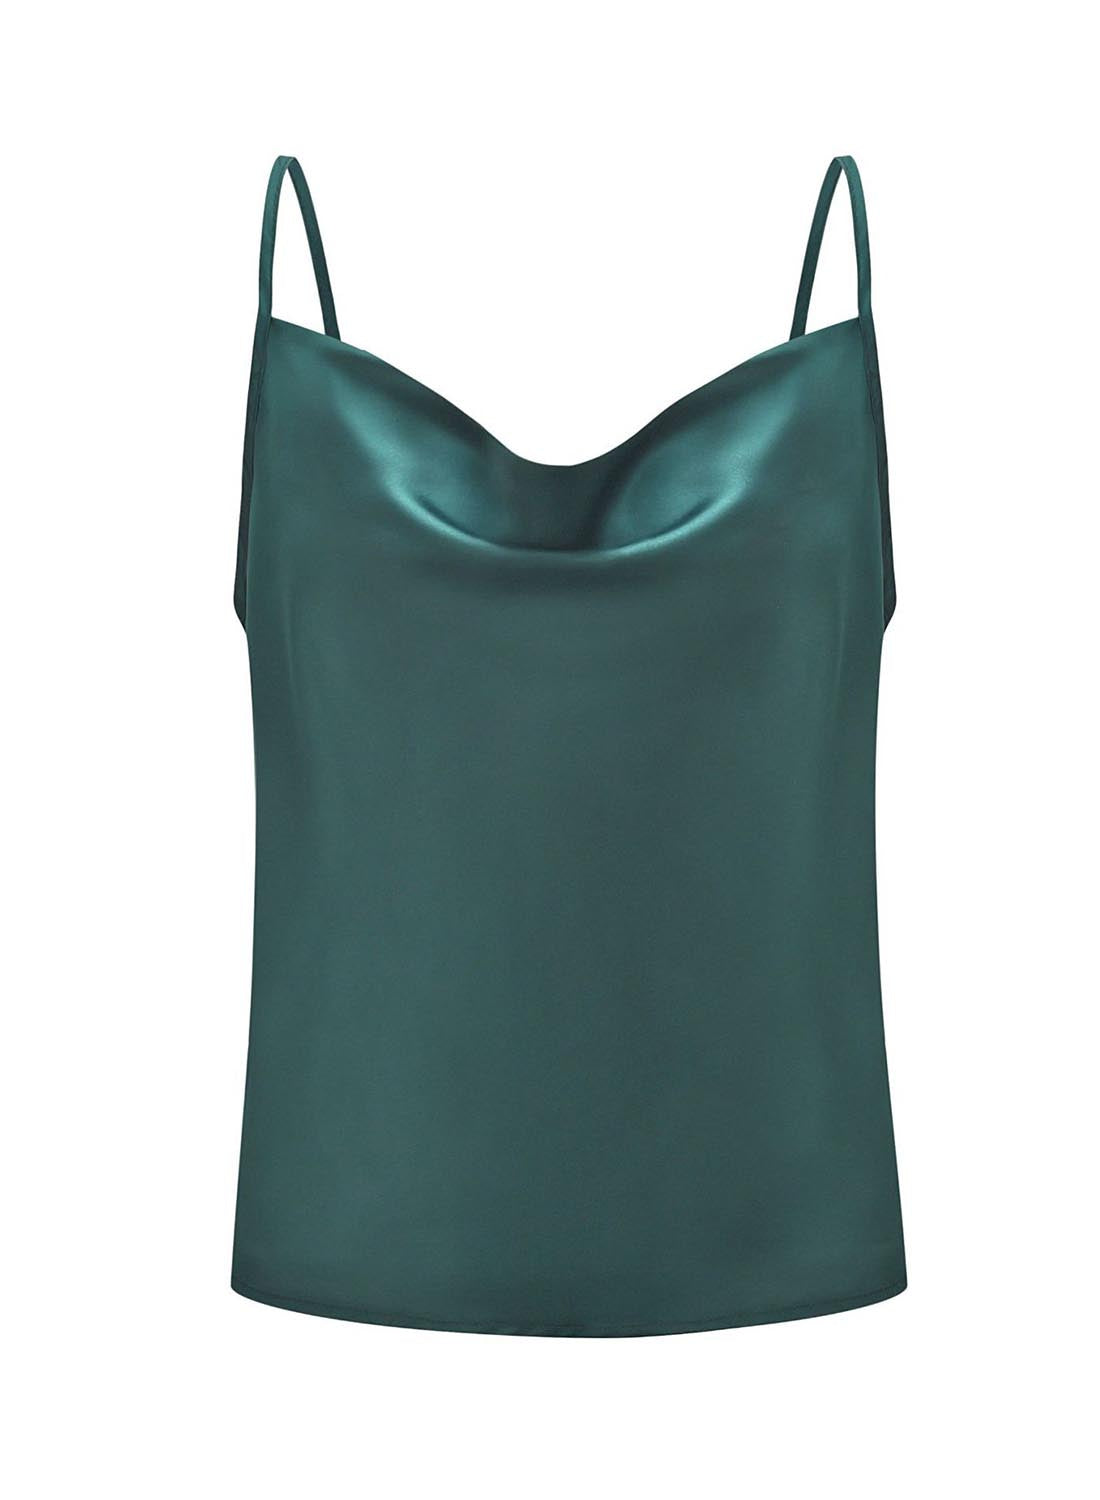 Green Women's Cami Tops Solid Cami Tops LC2562412-109